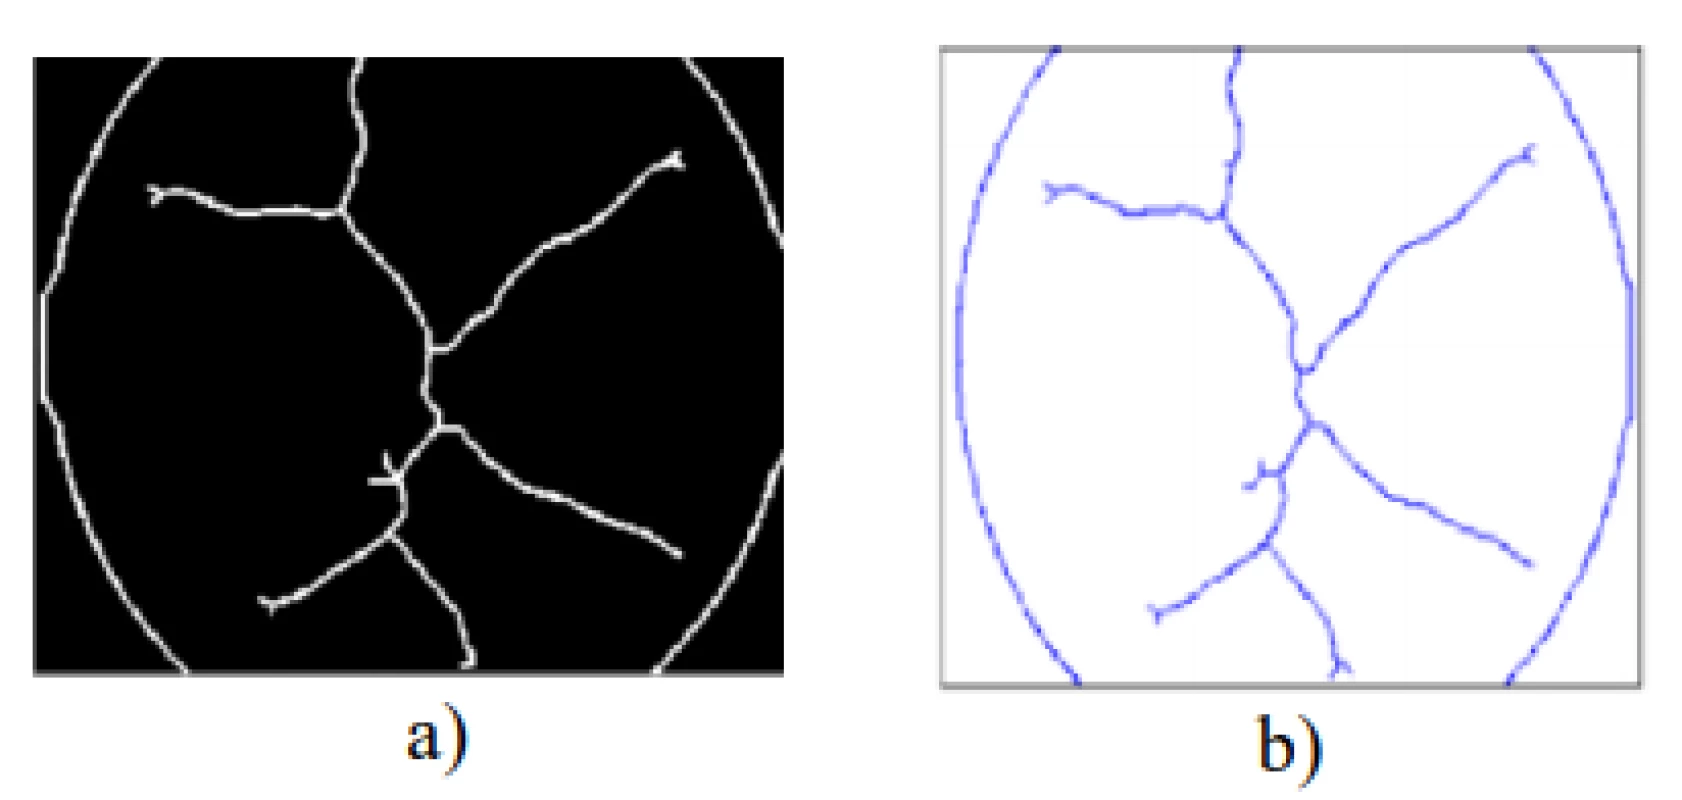 a) Skeletonization of image, b) transformation
into the coordinate system